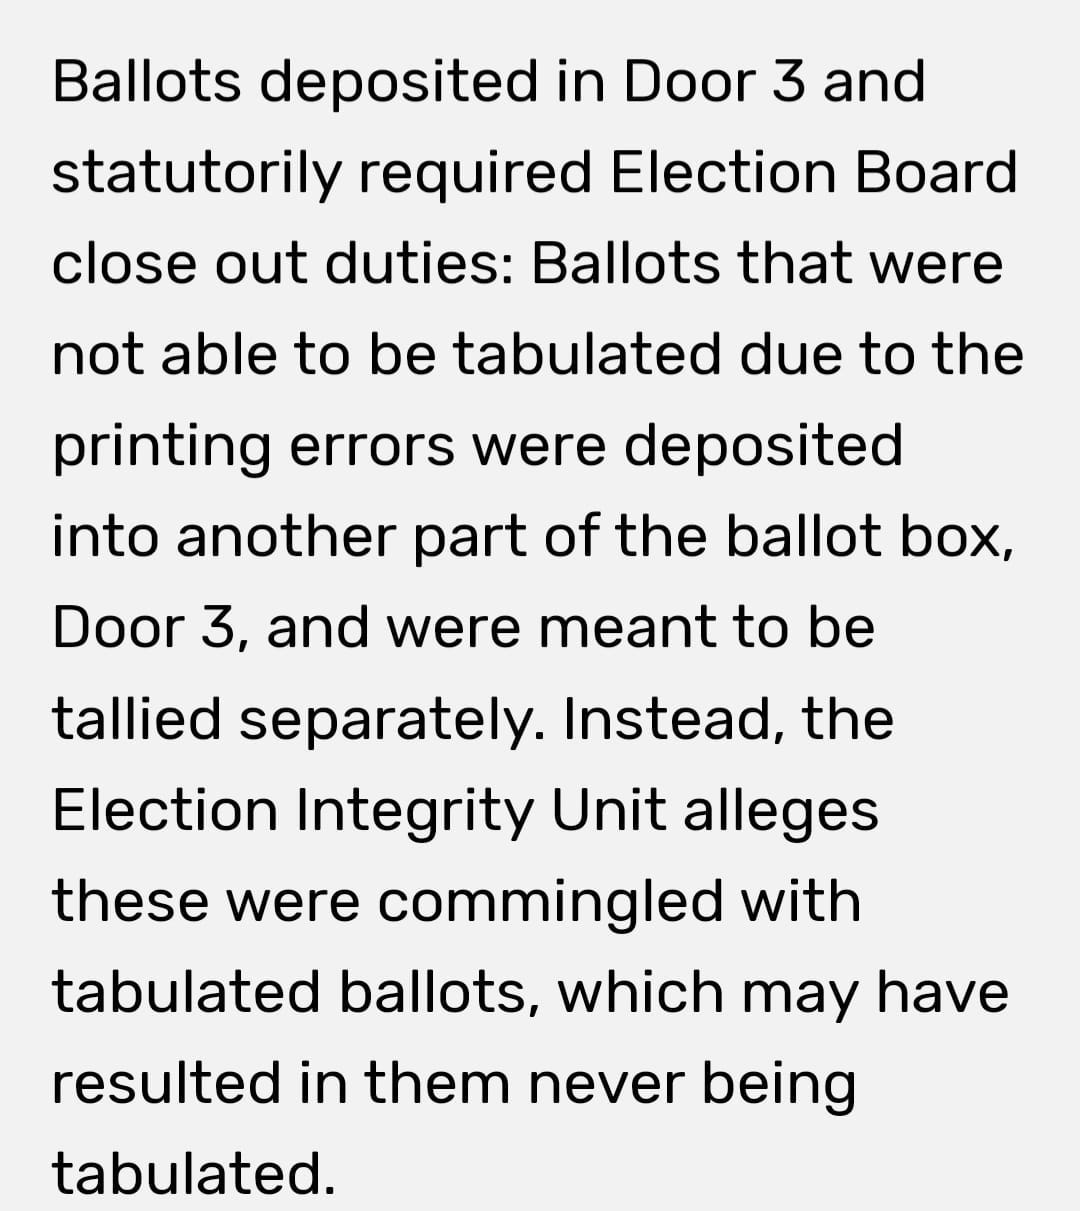 May be an image of text that says 'Ballots deposited in Door 3 and statutorily required Election Board close out duties: Ballots that were not able to be tabulated due to the printing errors were deposited into another part of the ballot box, Door 3, and were meant to be tallied separately. Instead, the Election Integrity Unit alleges these were commingled with tabulated ballots, which may have resulted in them never being tabulated.'